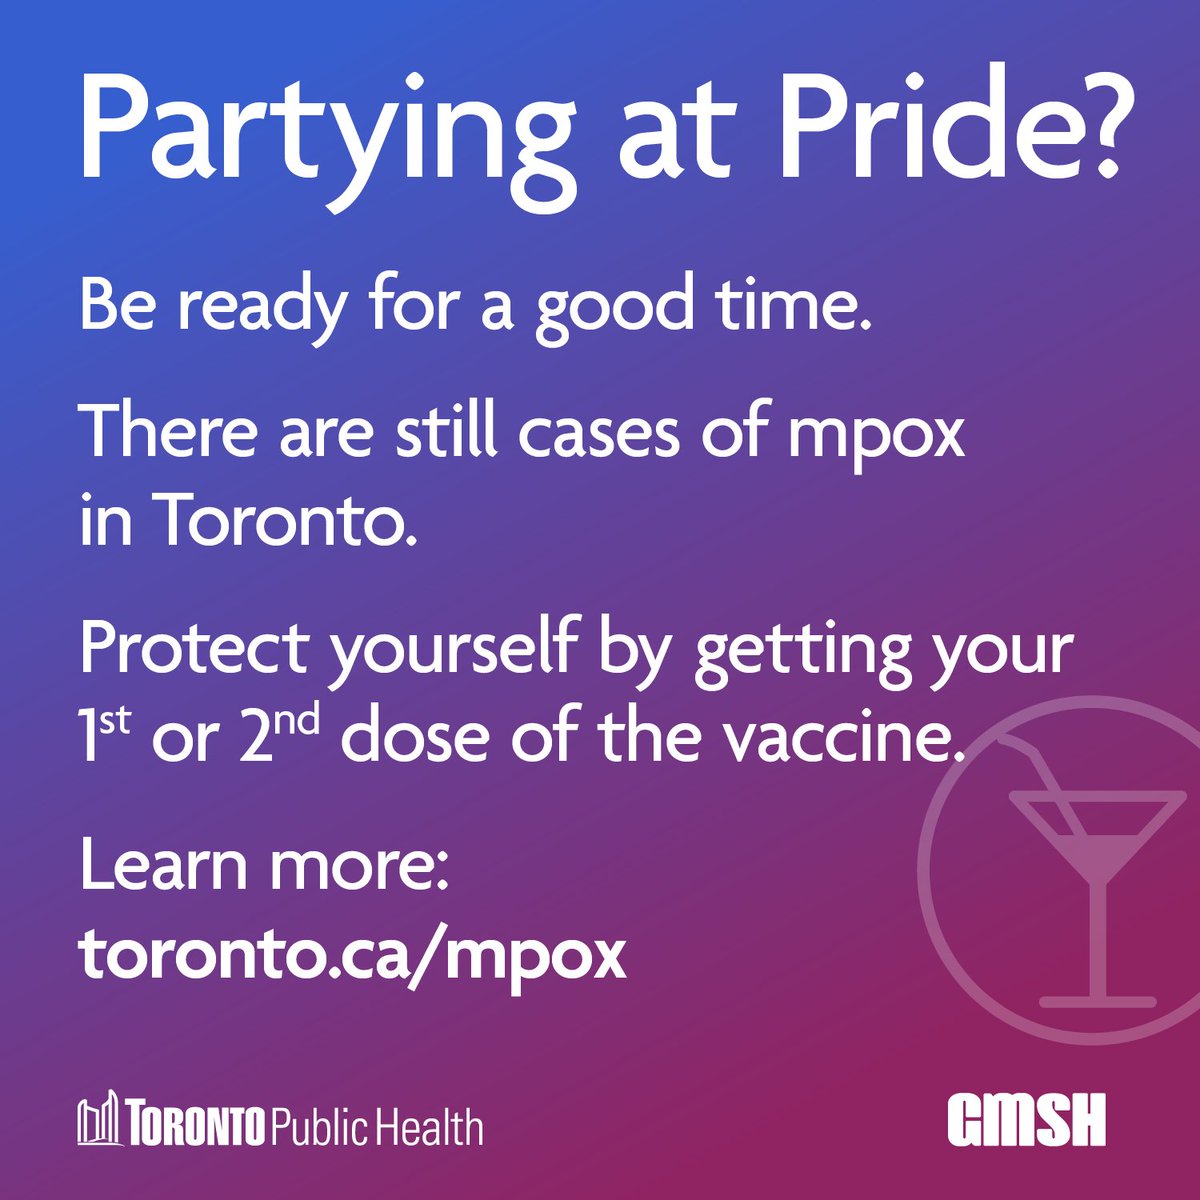 #Pride is just around the corner. Be ready for a good time.

As #mpox continues to spread, protect yourself & your partner by getting the mpox vaccine.

We're holding mpox vaccine clinics at Metro Hall on June 1 &  June 8 by appointment only.

Book now: tphbookings.ca